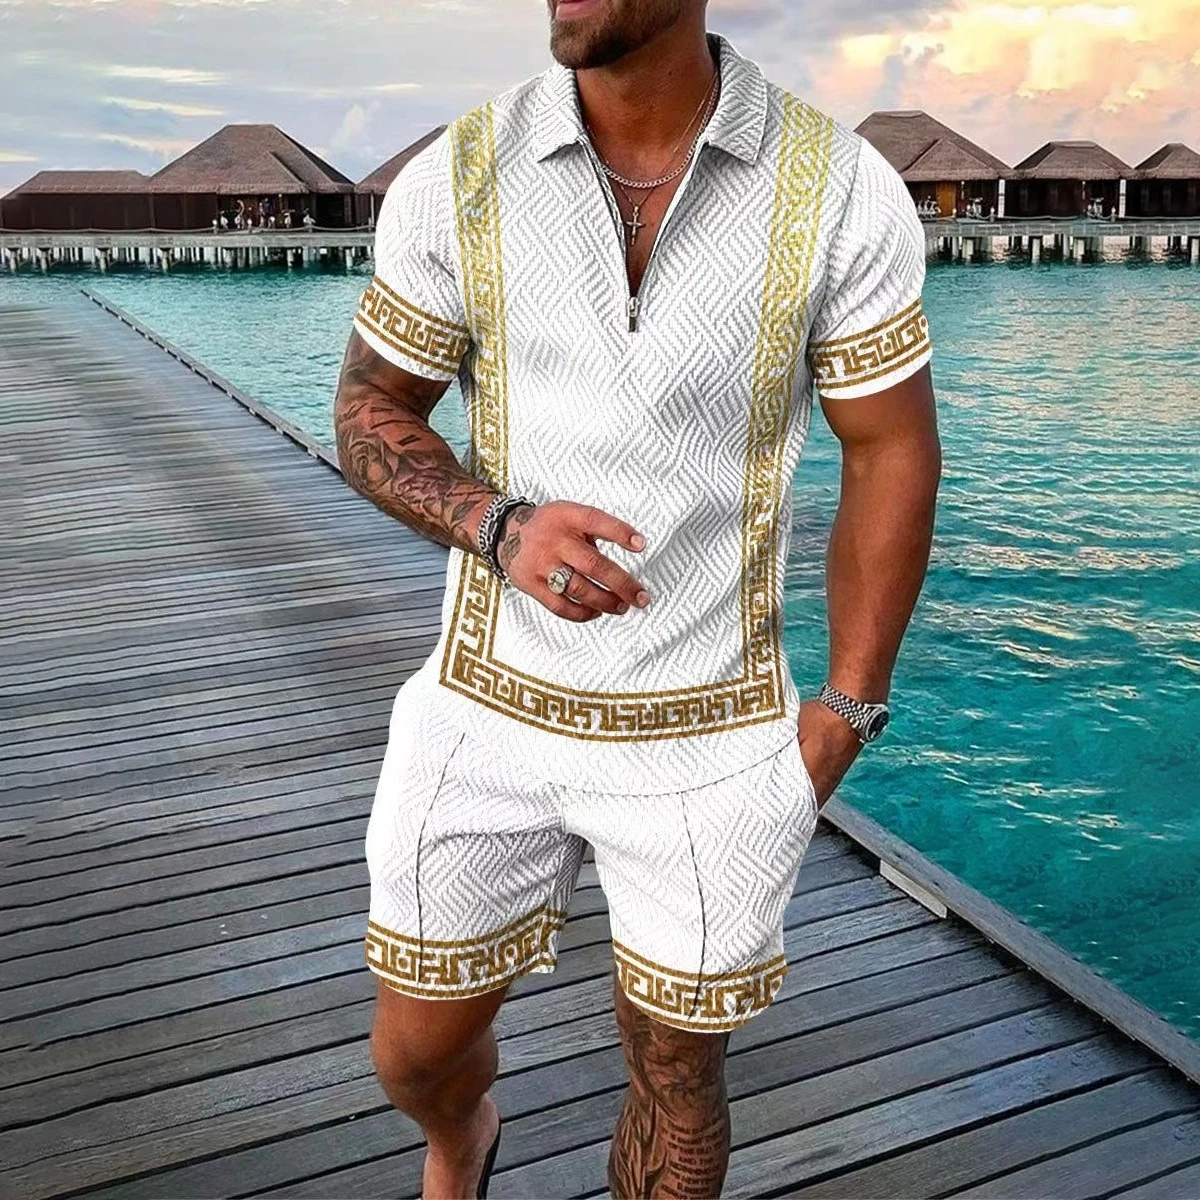 Newest Summer Casual Tracksuit Zipper Polo Shirt 2 Piece Sets for Men Business Suit Printed Outfits Men Oversized Clothing newest summer men sets ethnic wind retro print shorts outfits vintage men’s clothes t shirt 2pcs casual o nece tracksuit sport